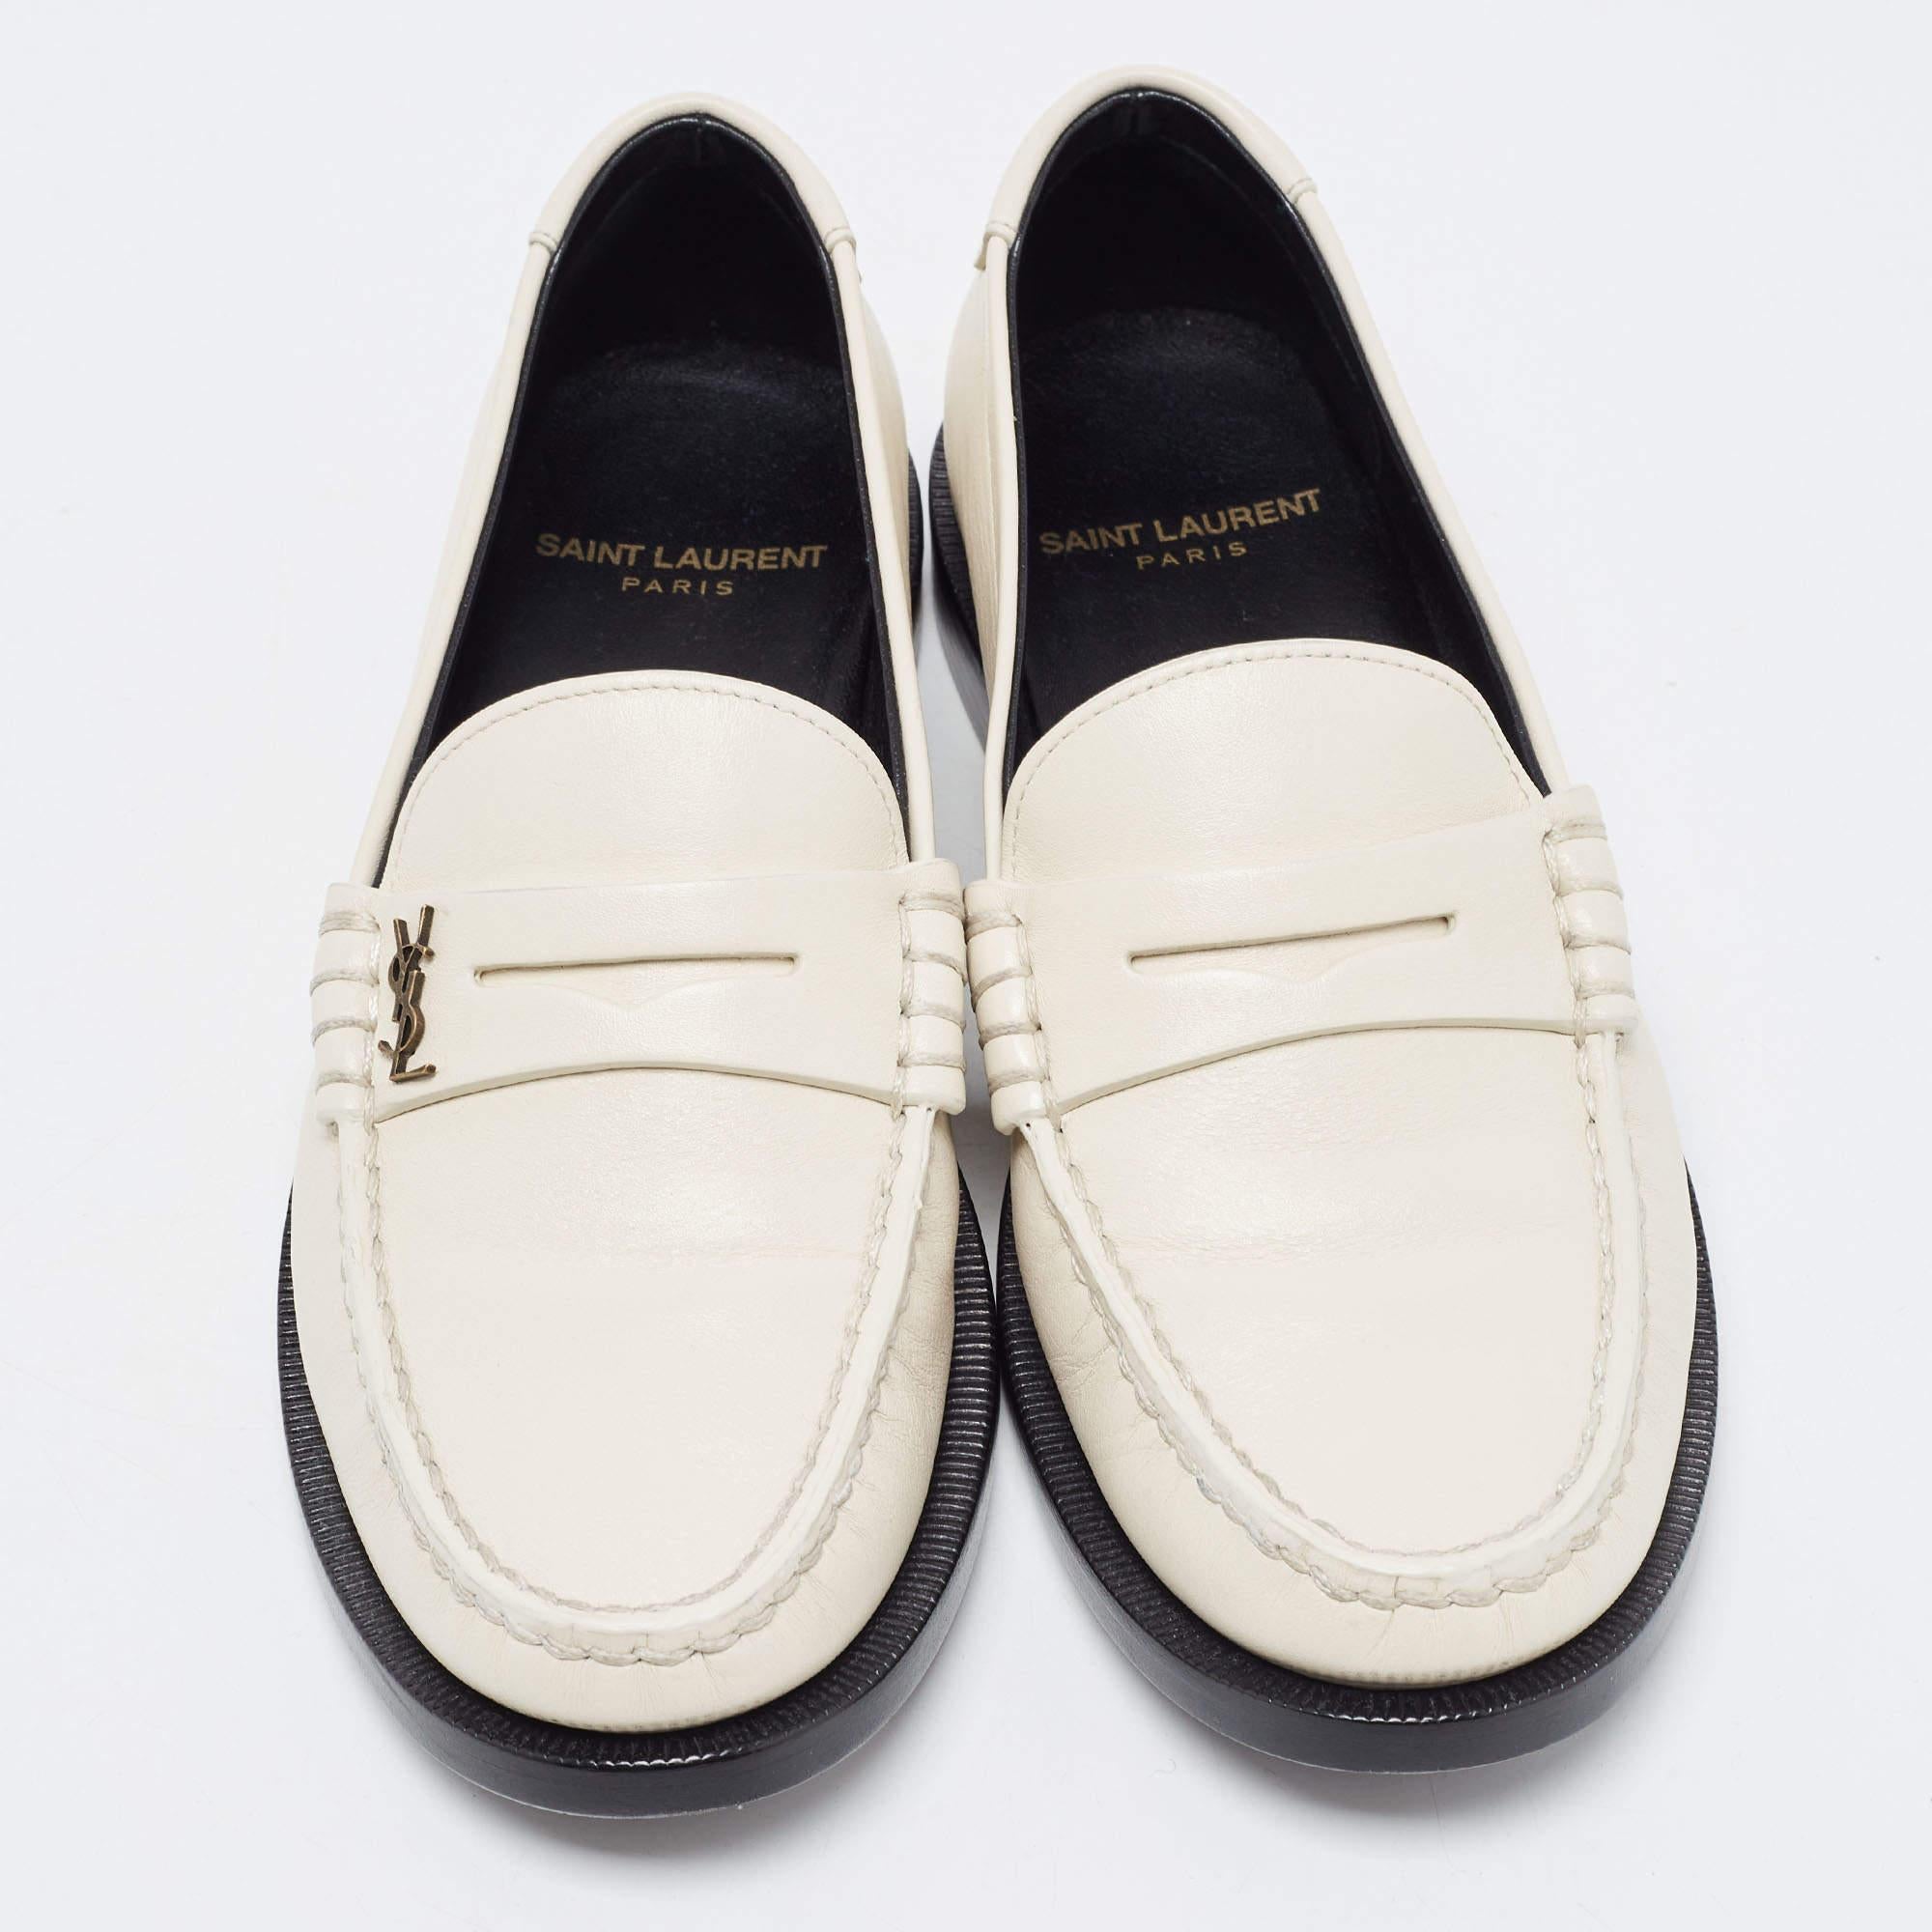 To perfectly complement your attires, we bring you this pair of loafers that speak nothing but style. The shoes have been crafted with skill and are designed to be easy to slip on. They are just the right choice to complement your fashionable